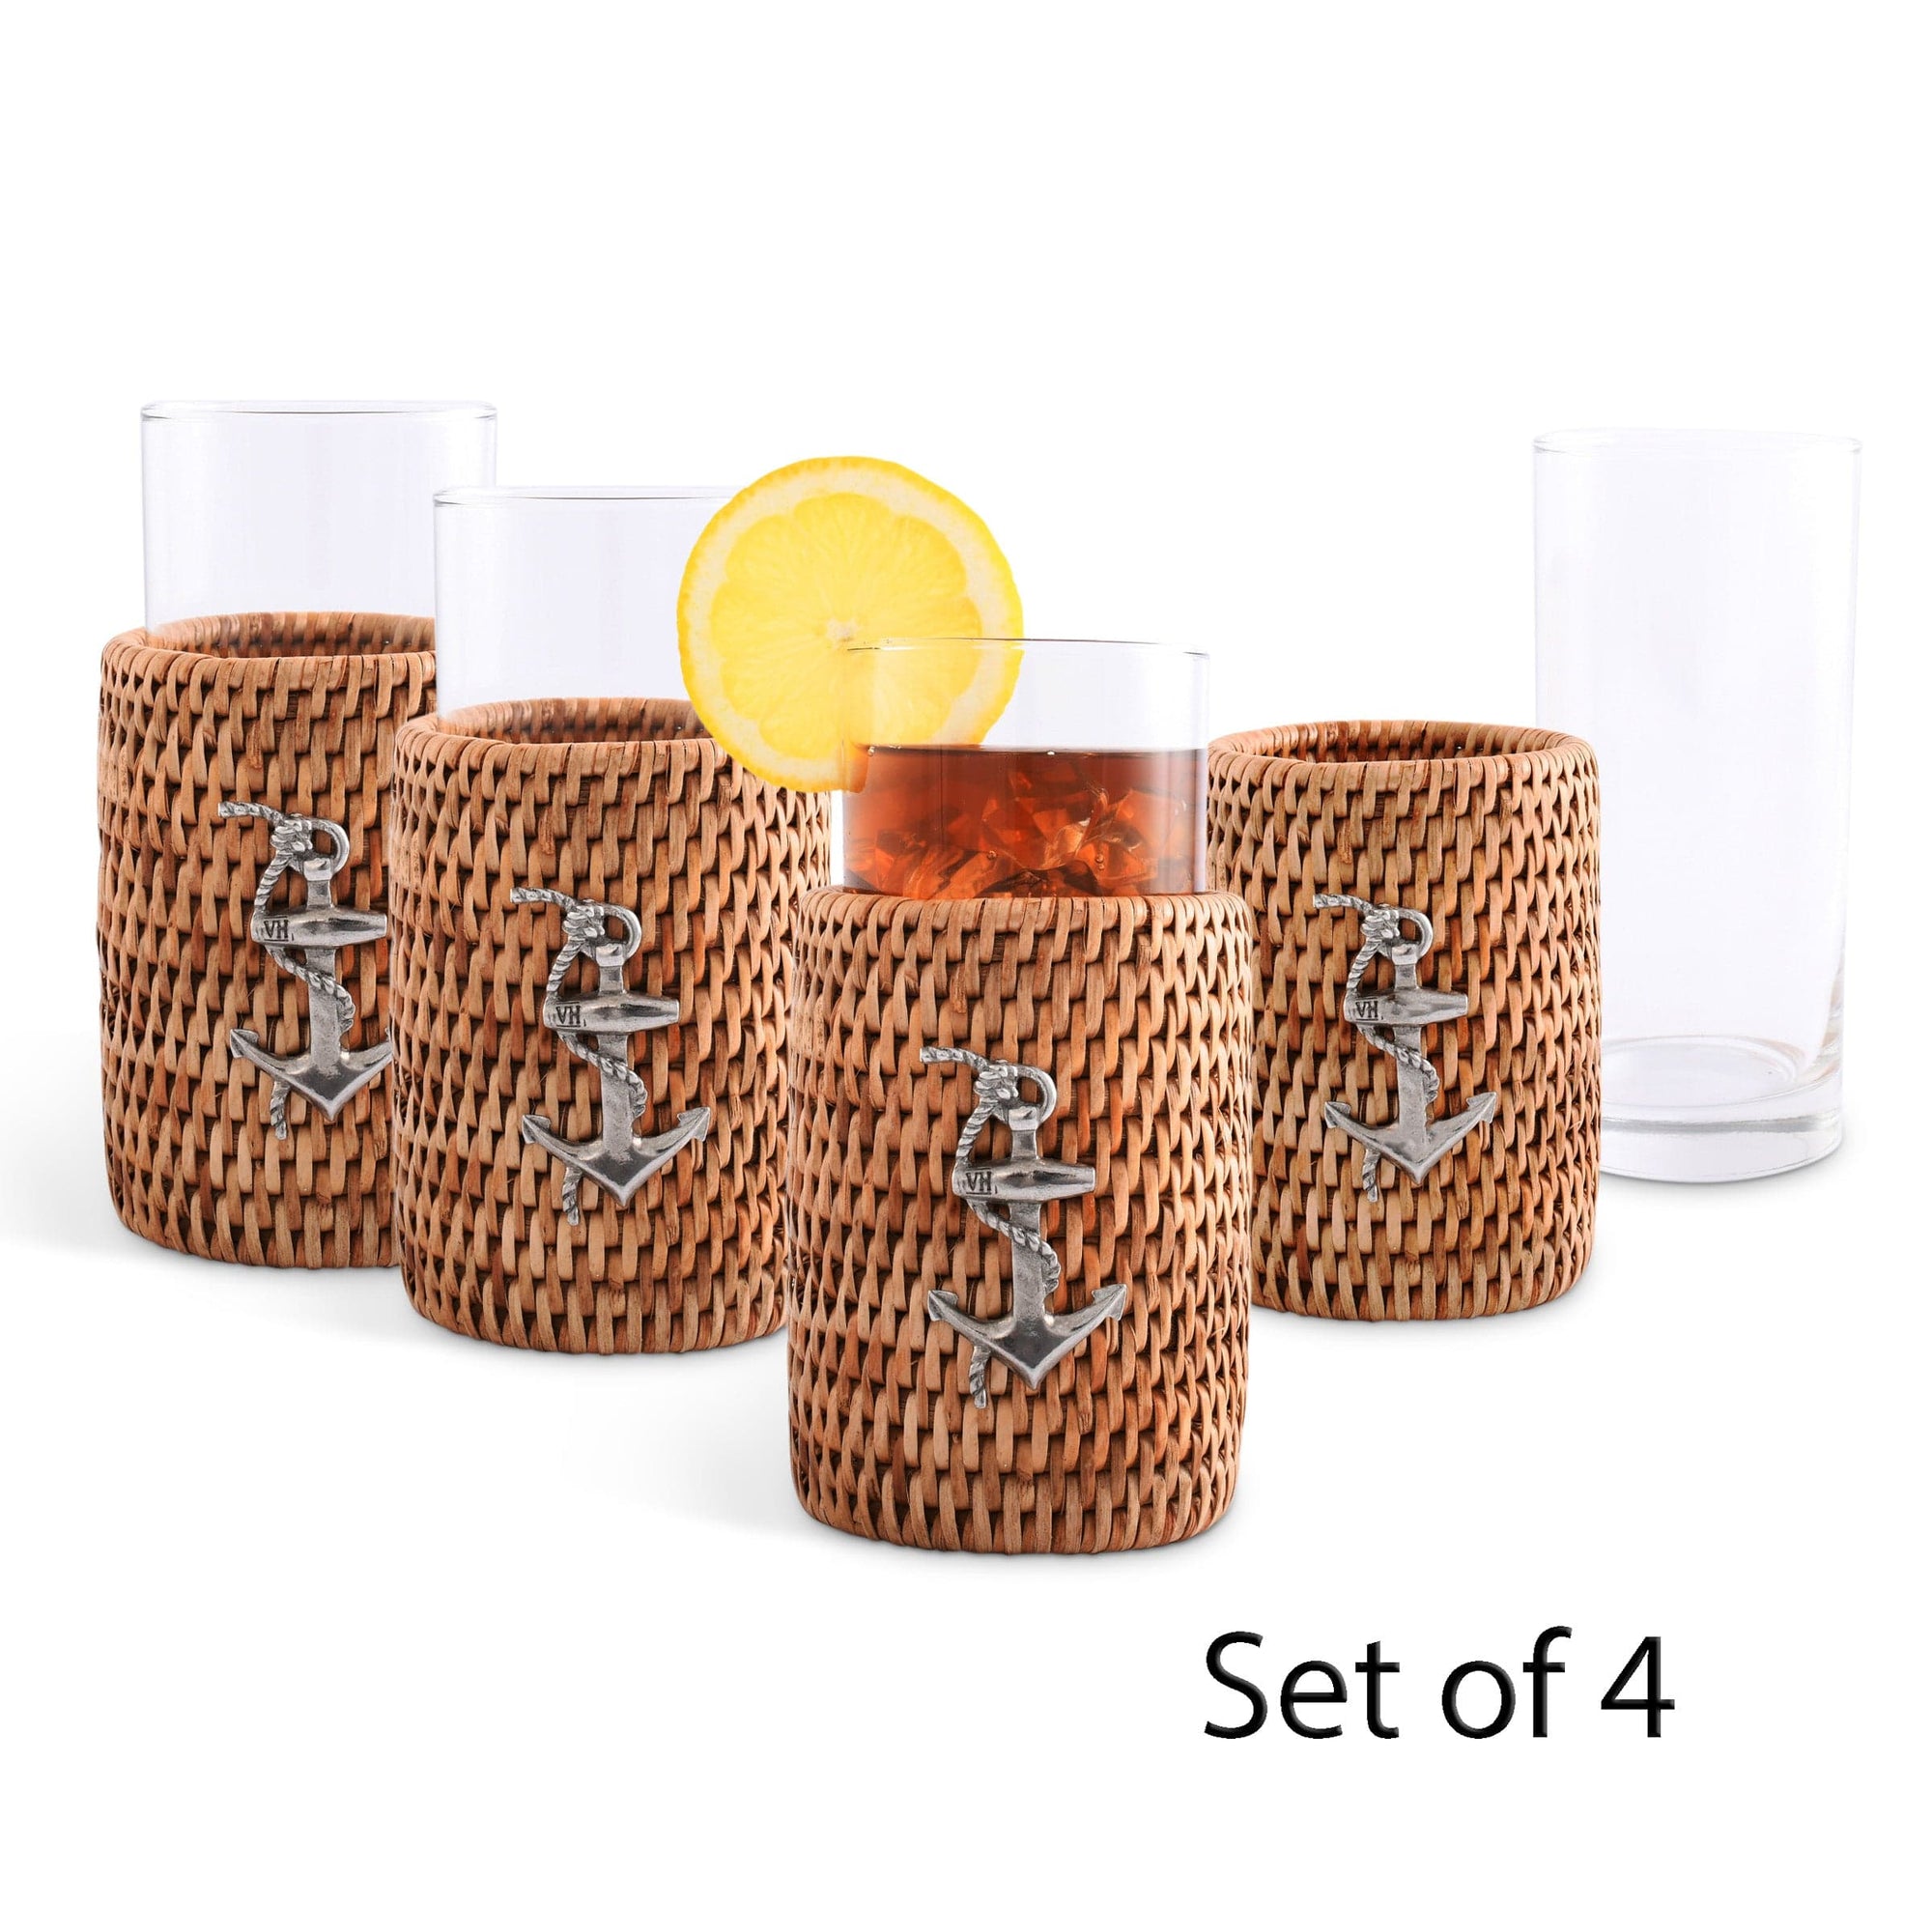 Vagabond House Sea and Shore Anchor Drinking Glass Covered with Hand Woven Wicker Rattan - Set of 4